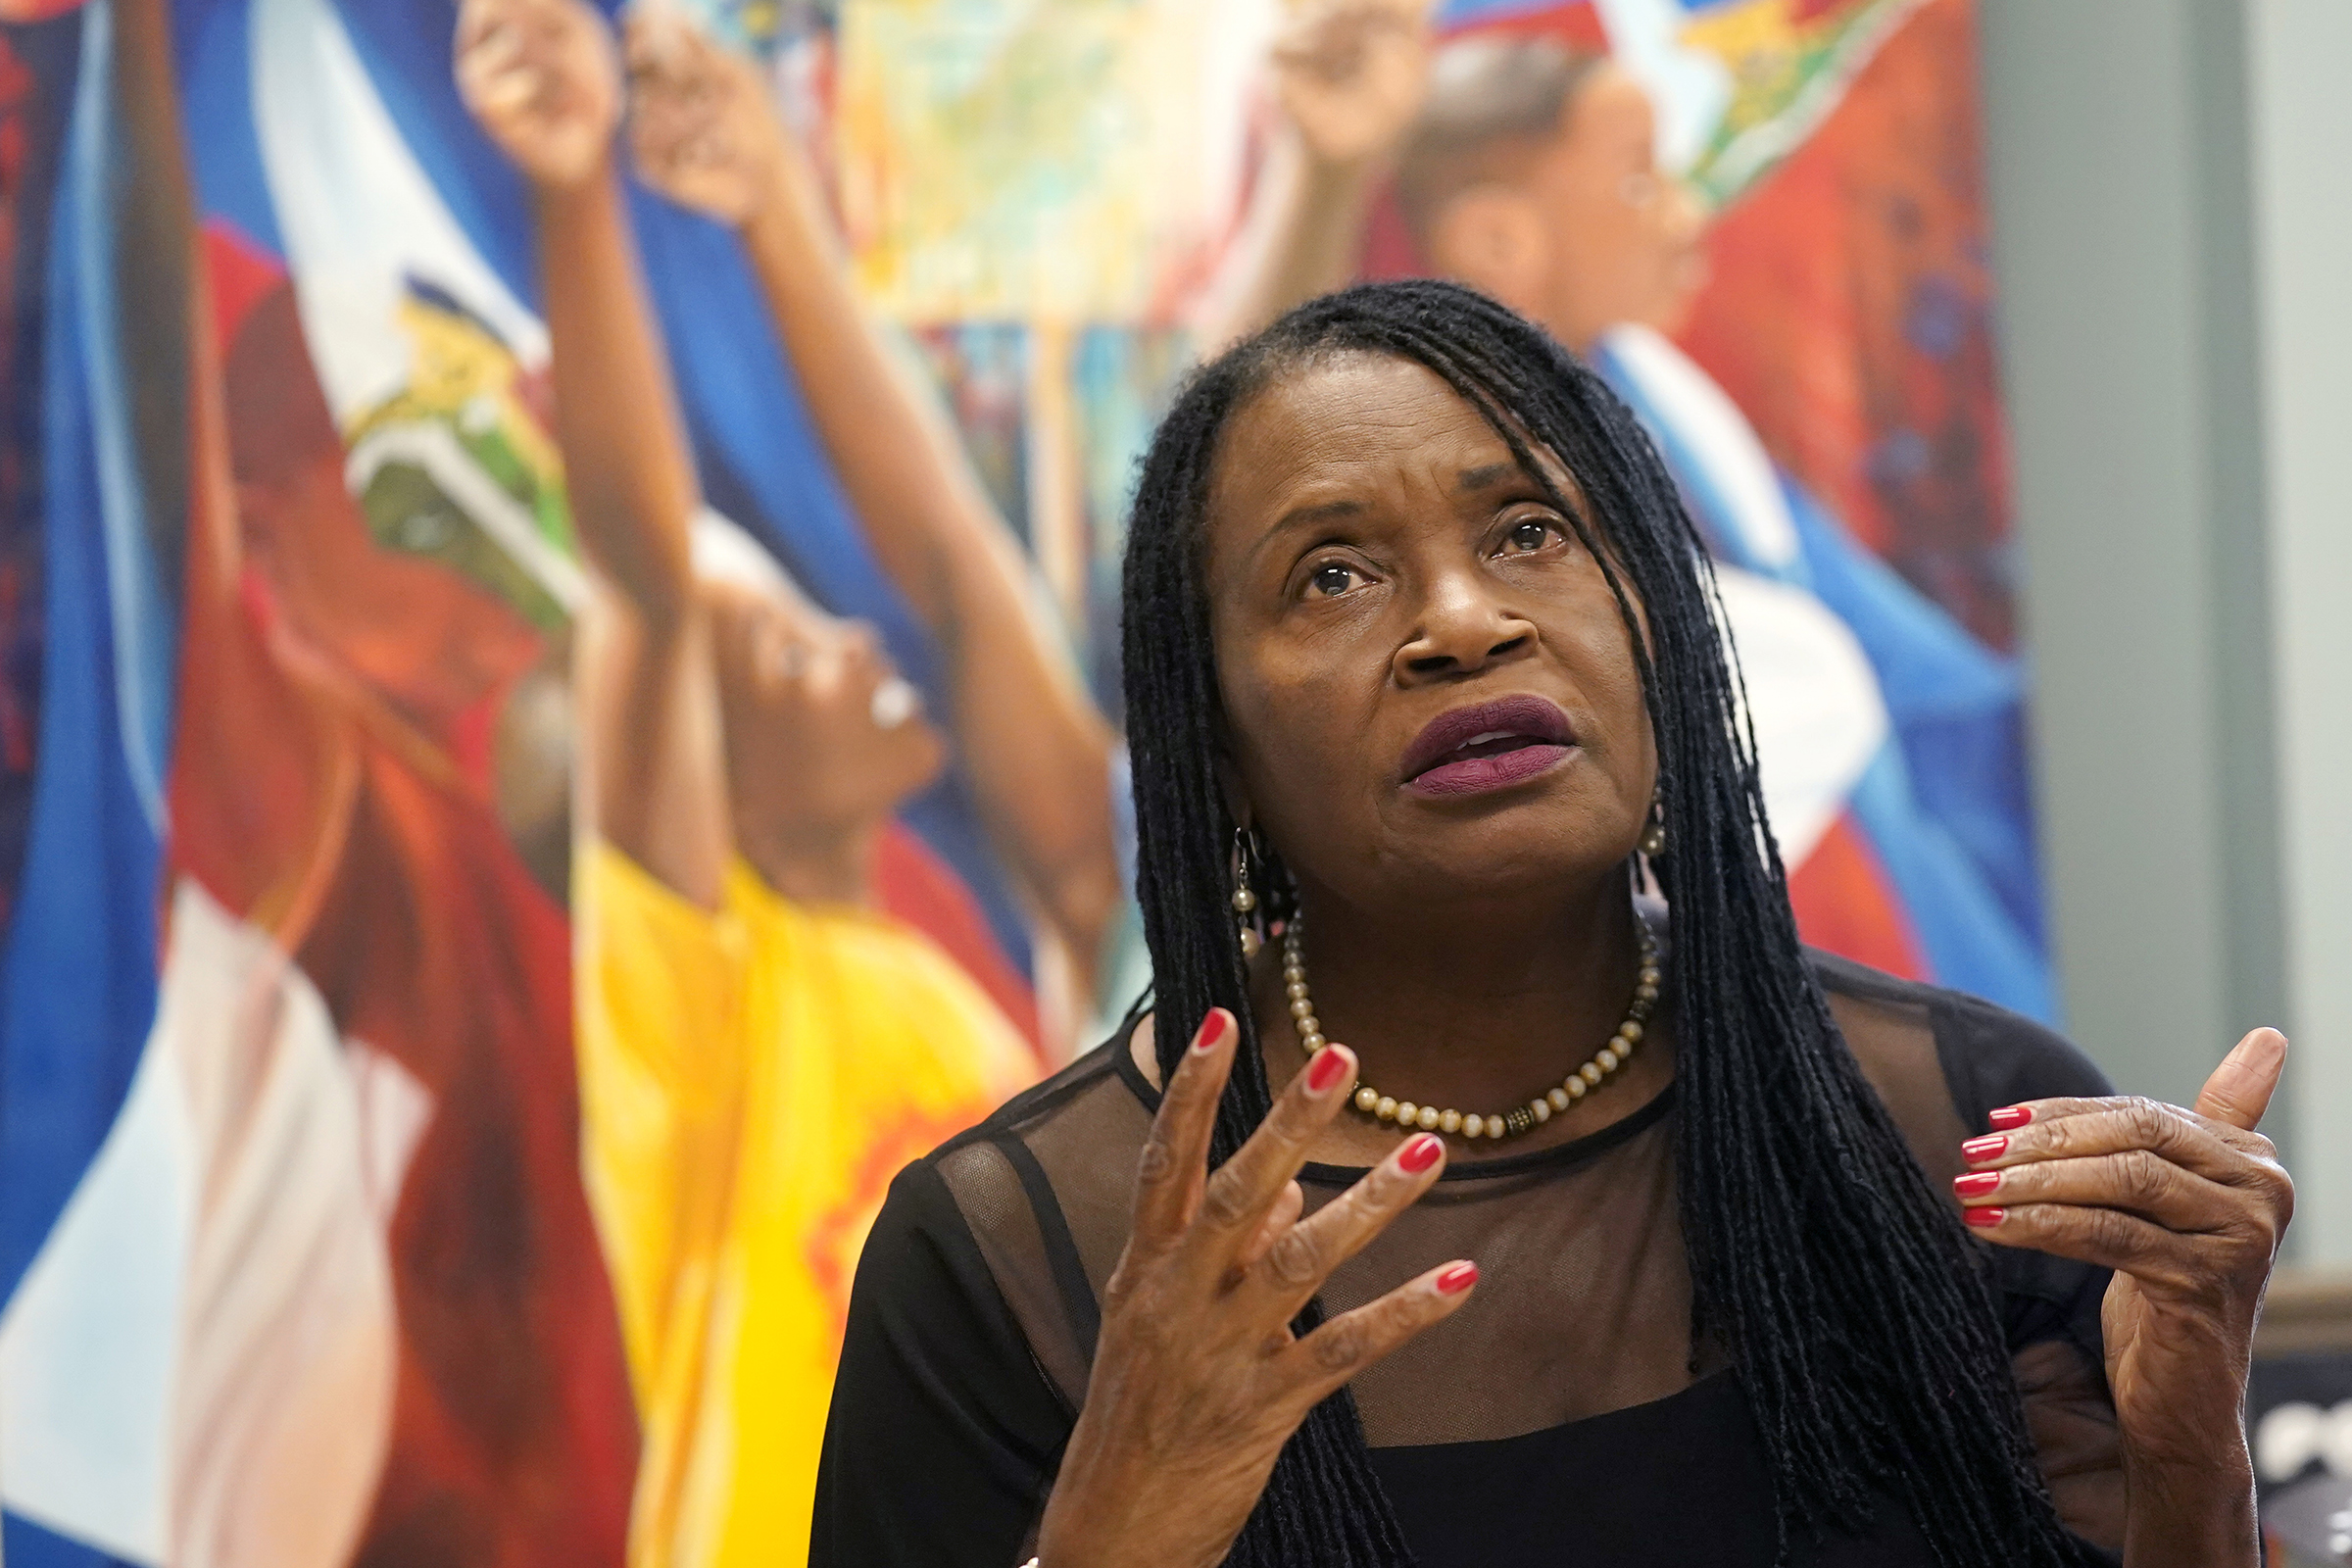 Marleine Bastien, Executive Director of the Family Action Network Movement (FAMM), speaks in Miami following the news that Haitian President Jovenel Moïse was assassinated on July 7, 2021. (Lynne Sladky—AP)